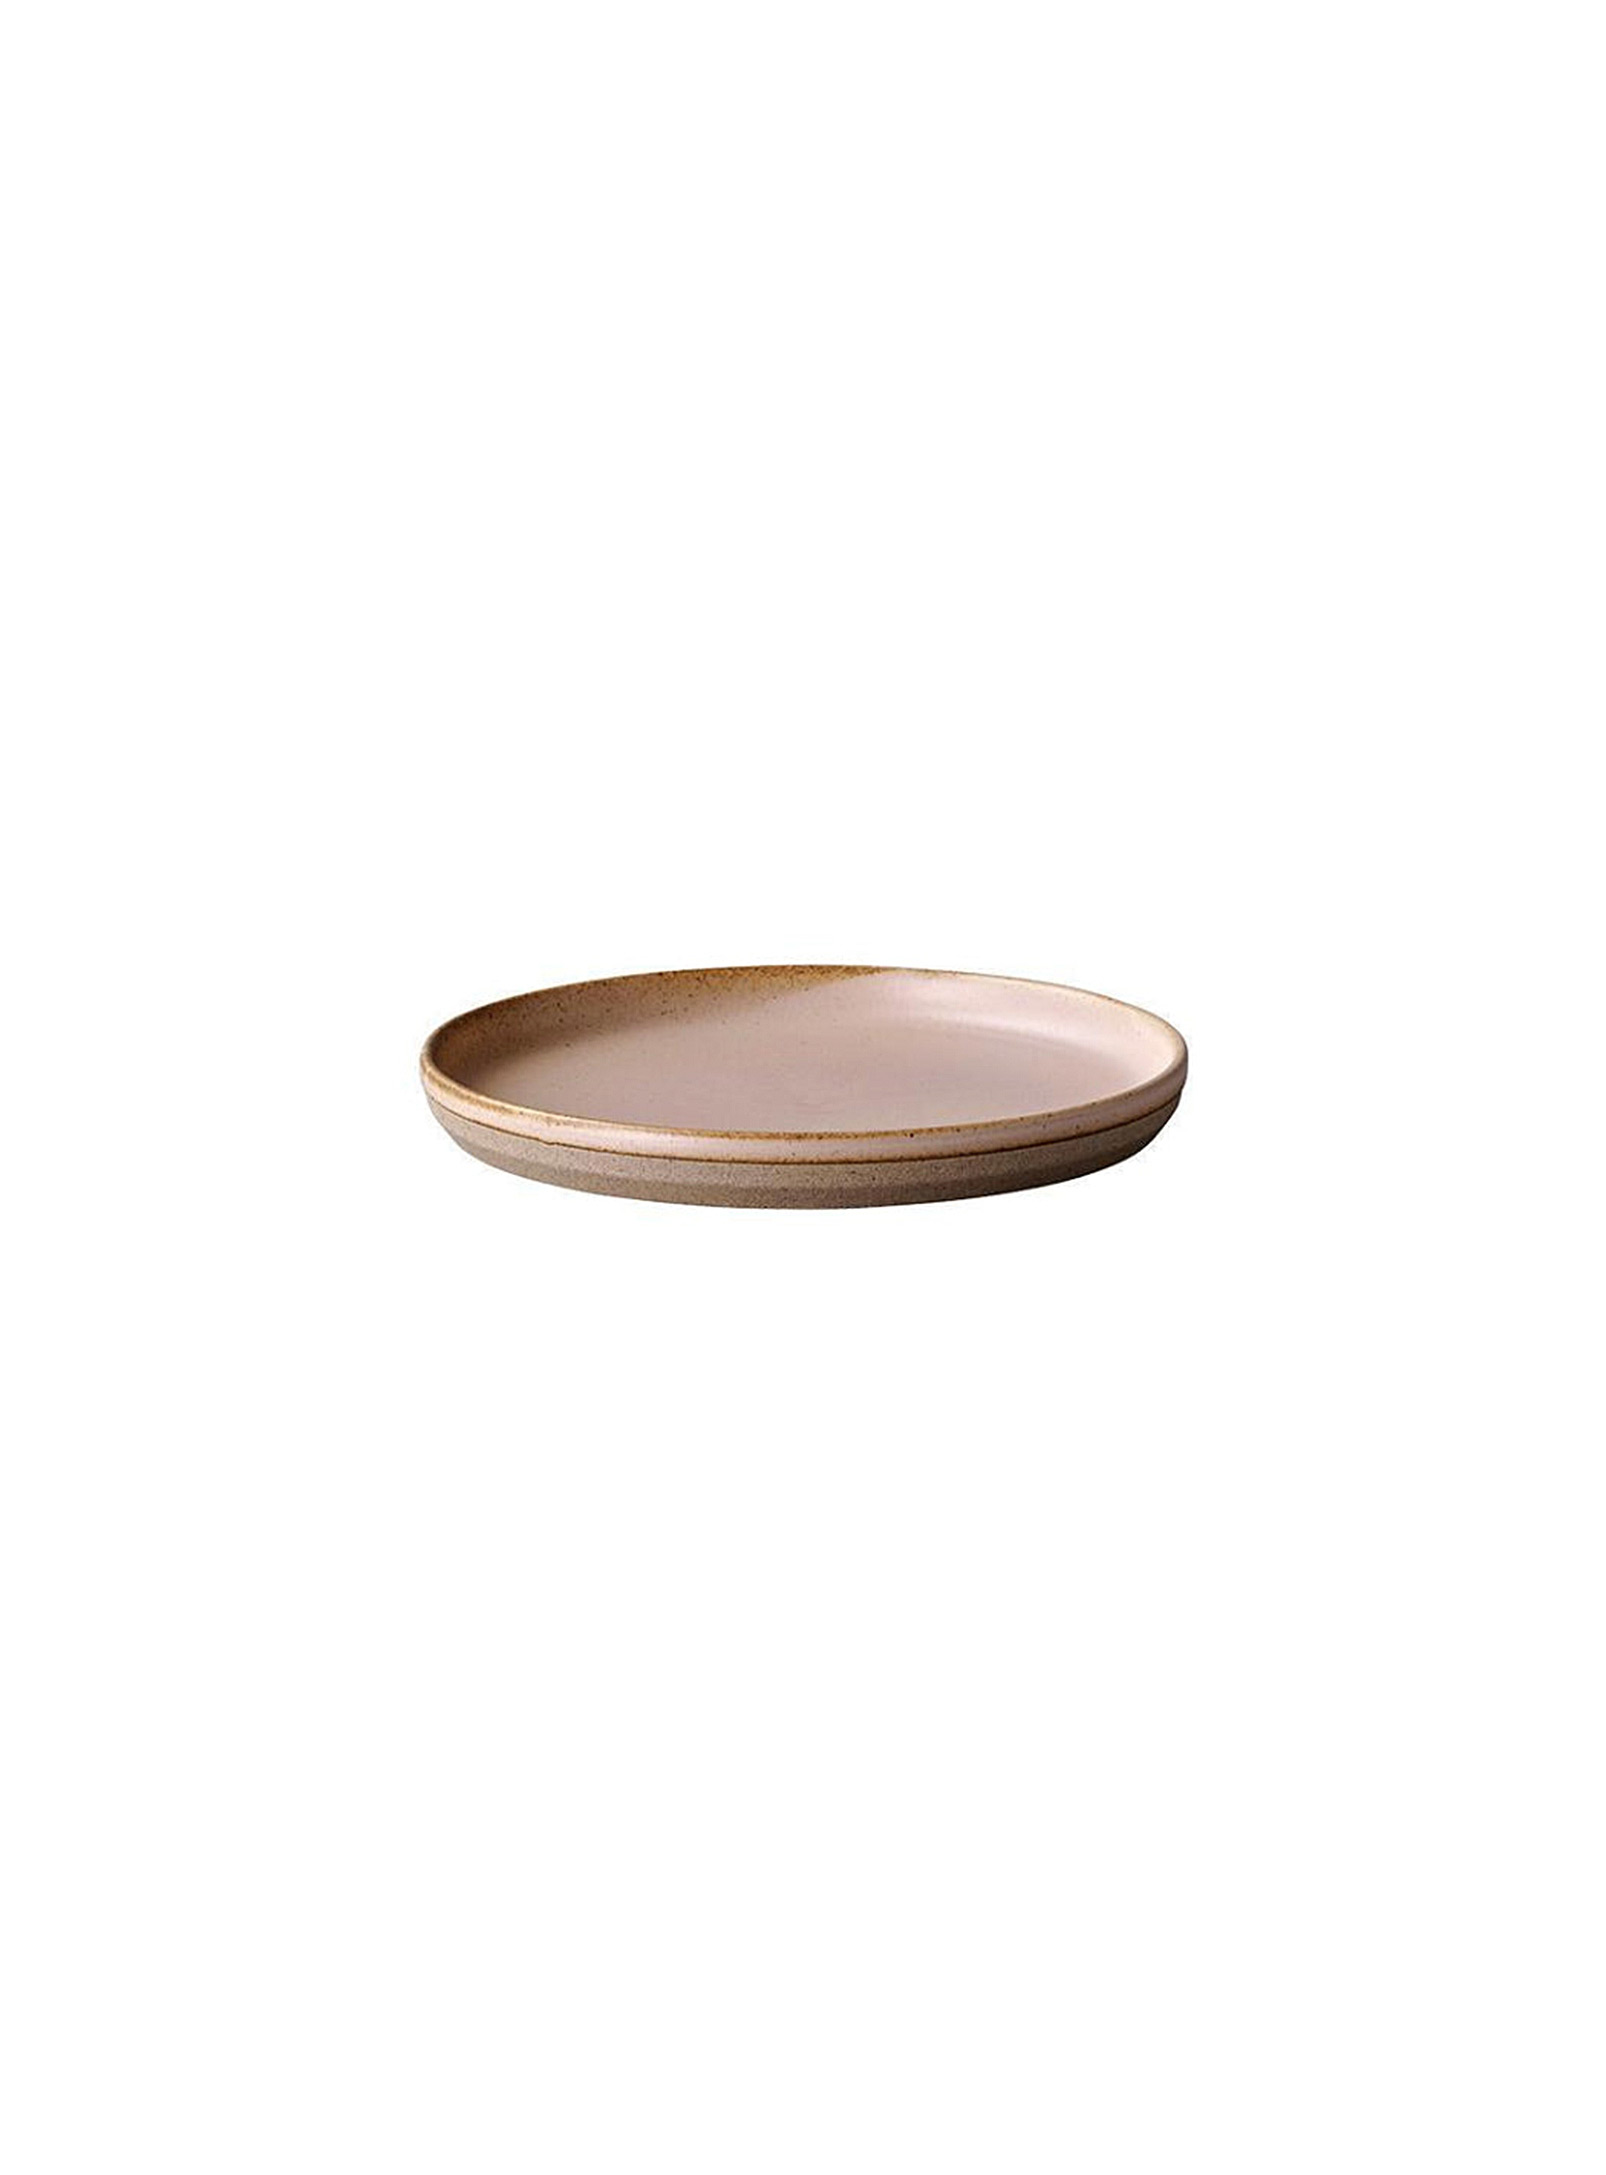 Kinto Two-tone Porcelain Dessert Plates Set Of 3 In Pink